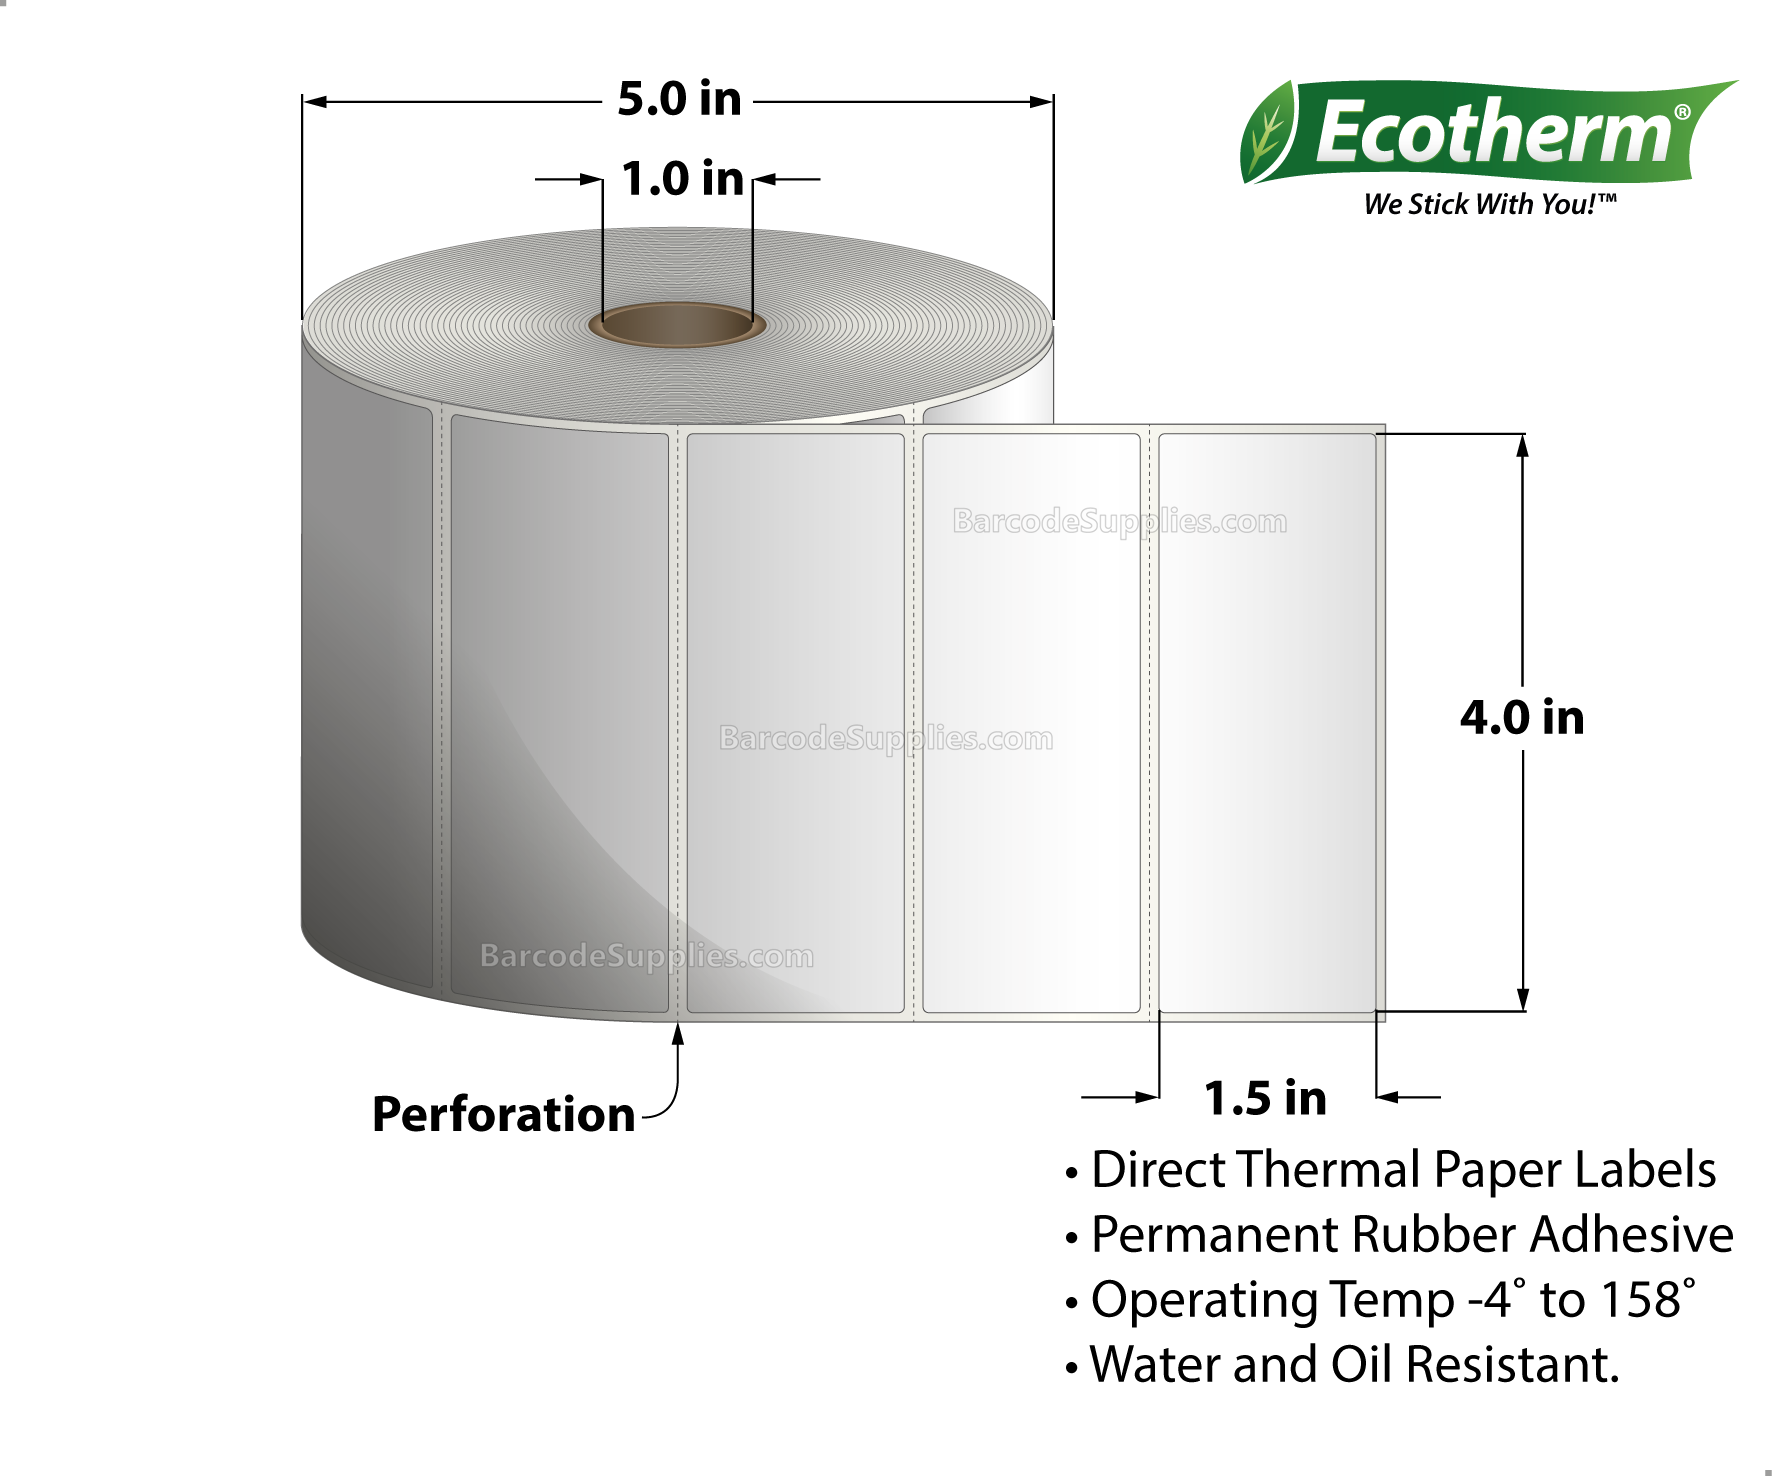 4 x 1.5 Direct Thermal White Labels With Rubber Adhesive - Perforated - 1800 Labels Per Roll - Carton Of 6 Rolls - 10800 Labels Total - MPN: ECOTHERM15148-6